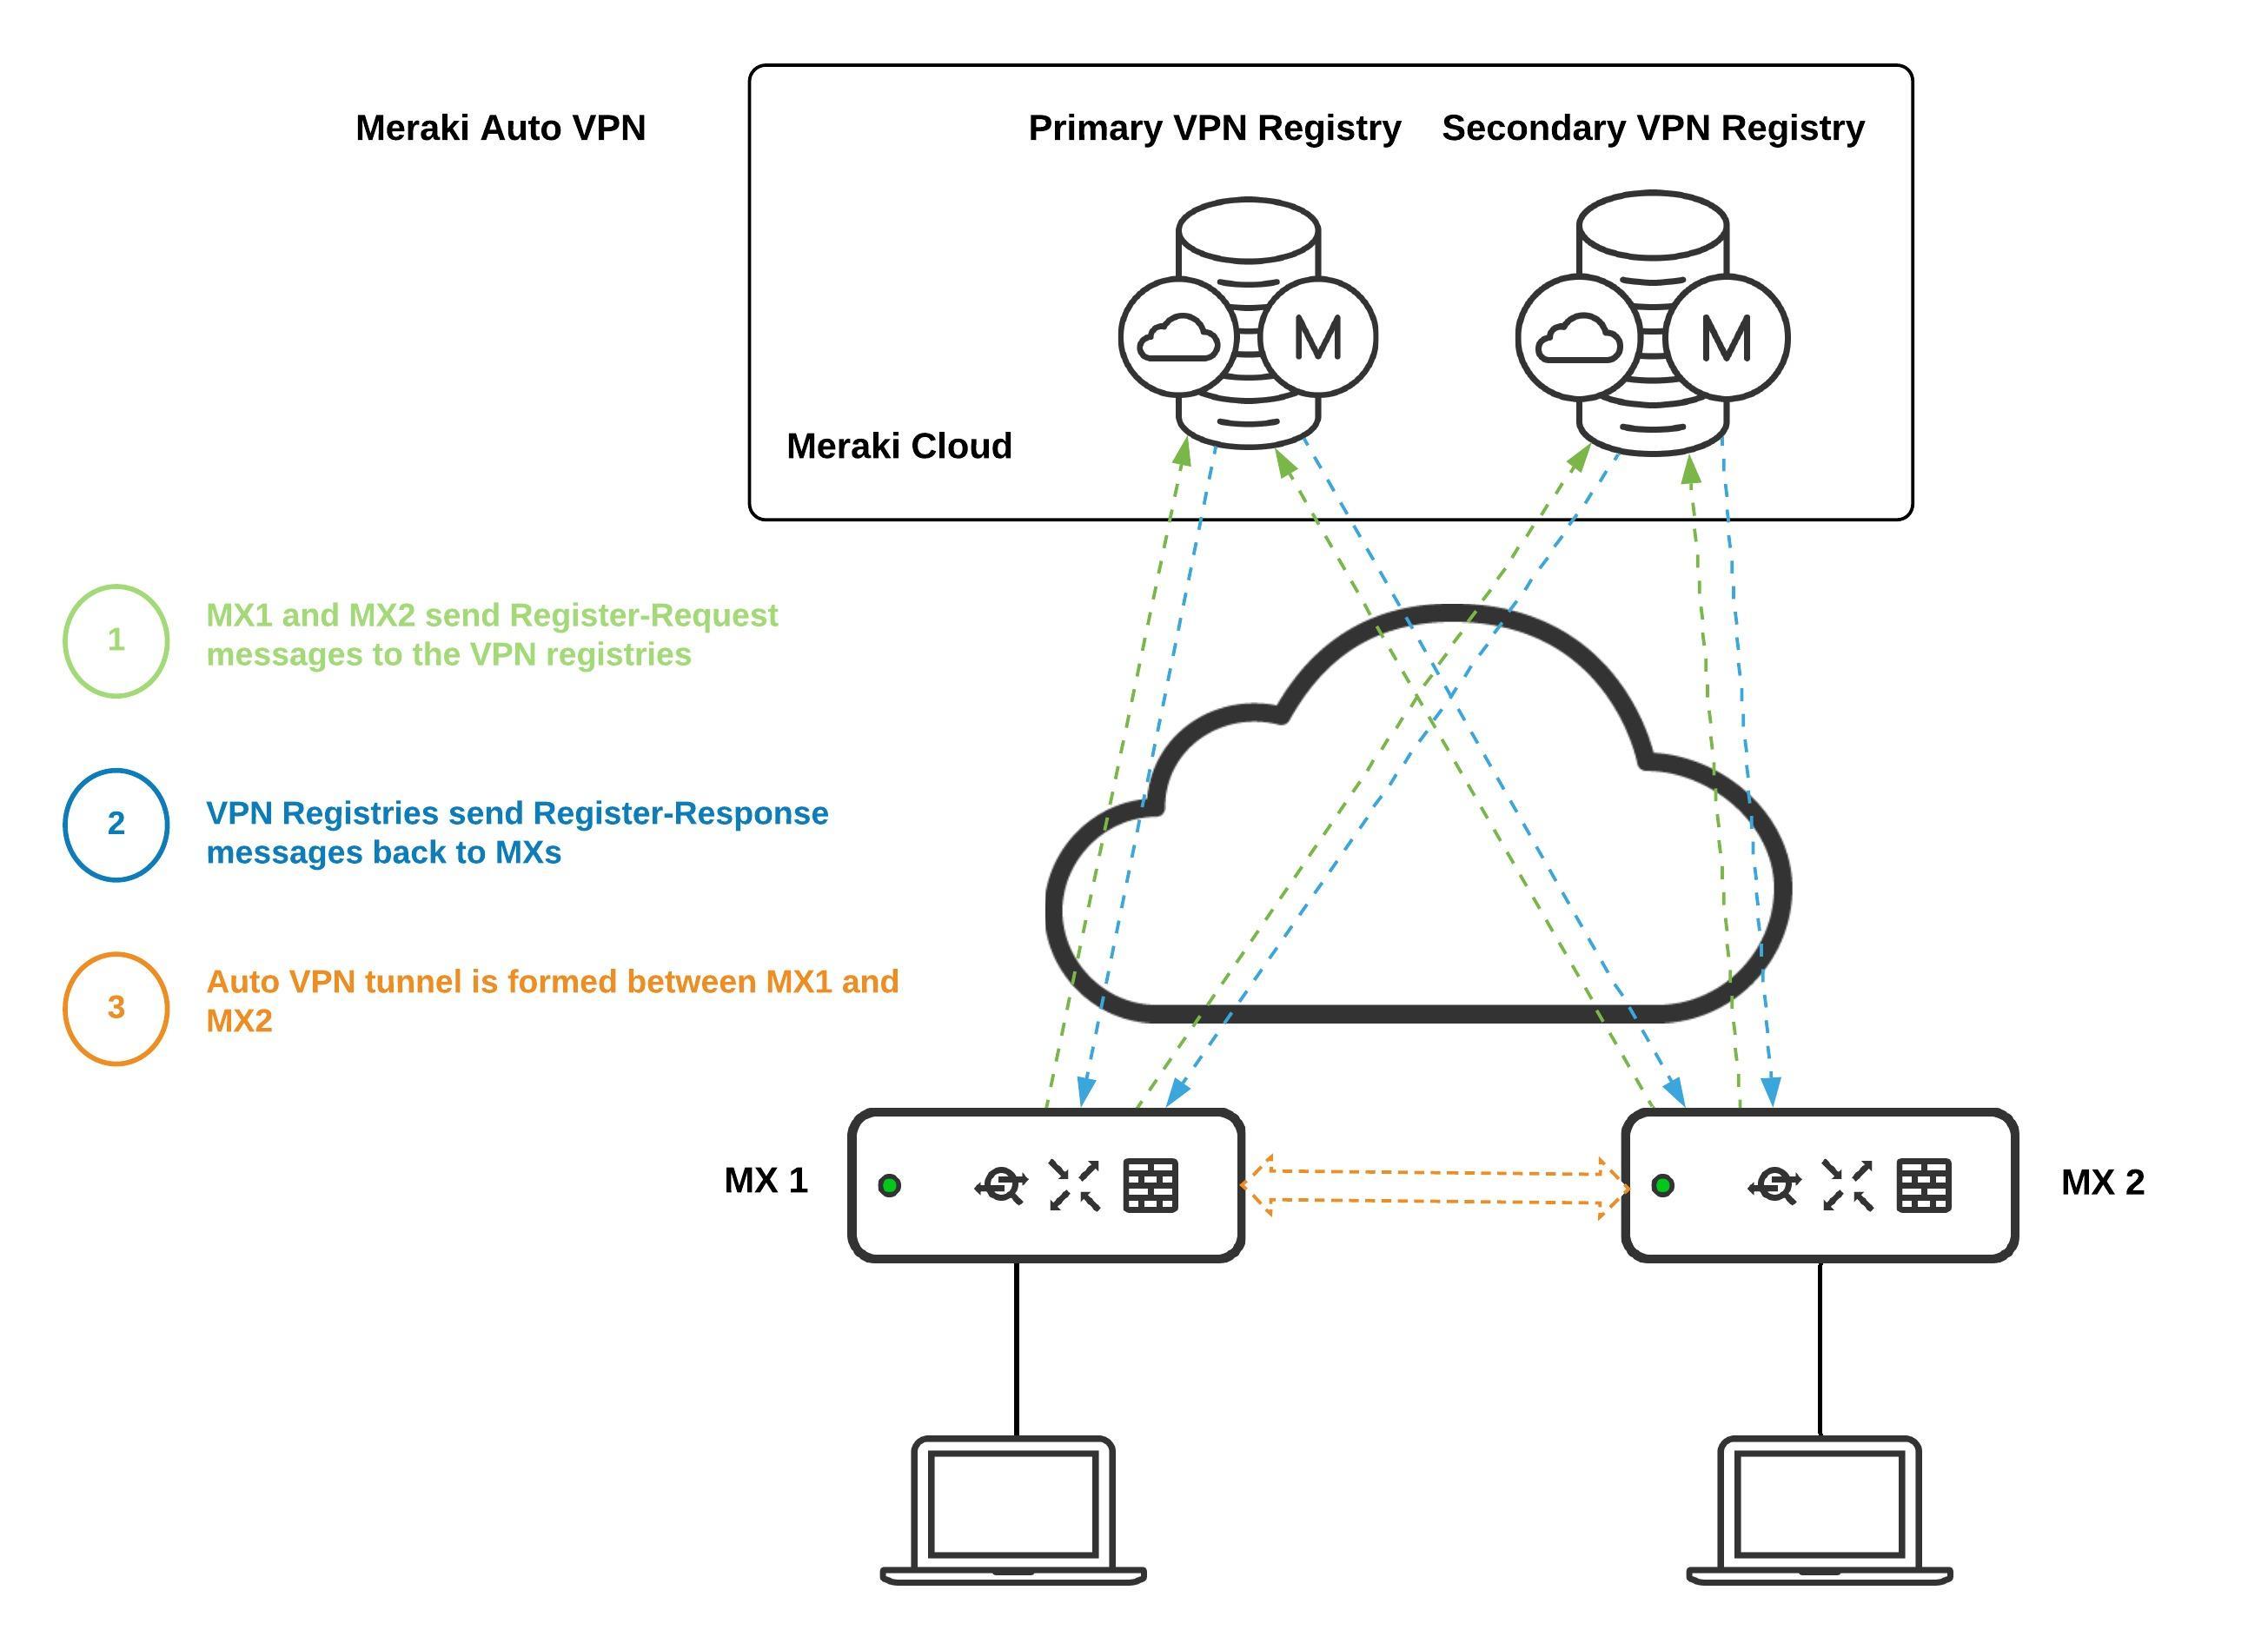 What ports are required for Meraki client VPN?